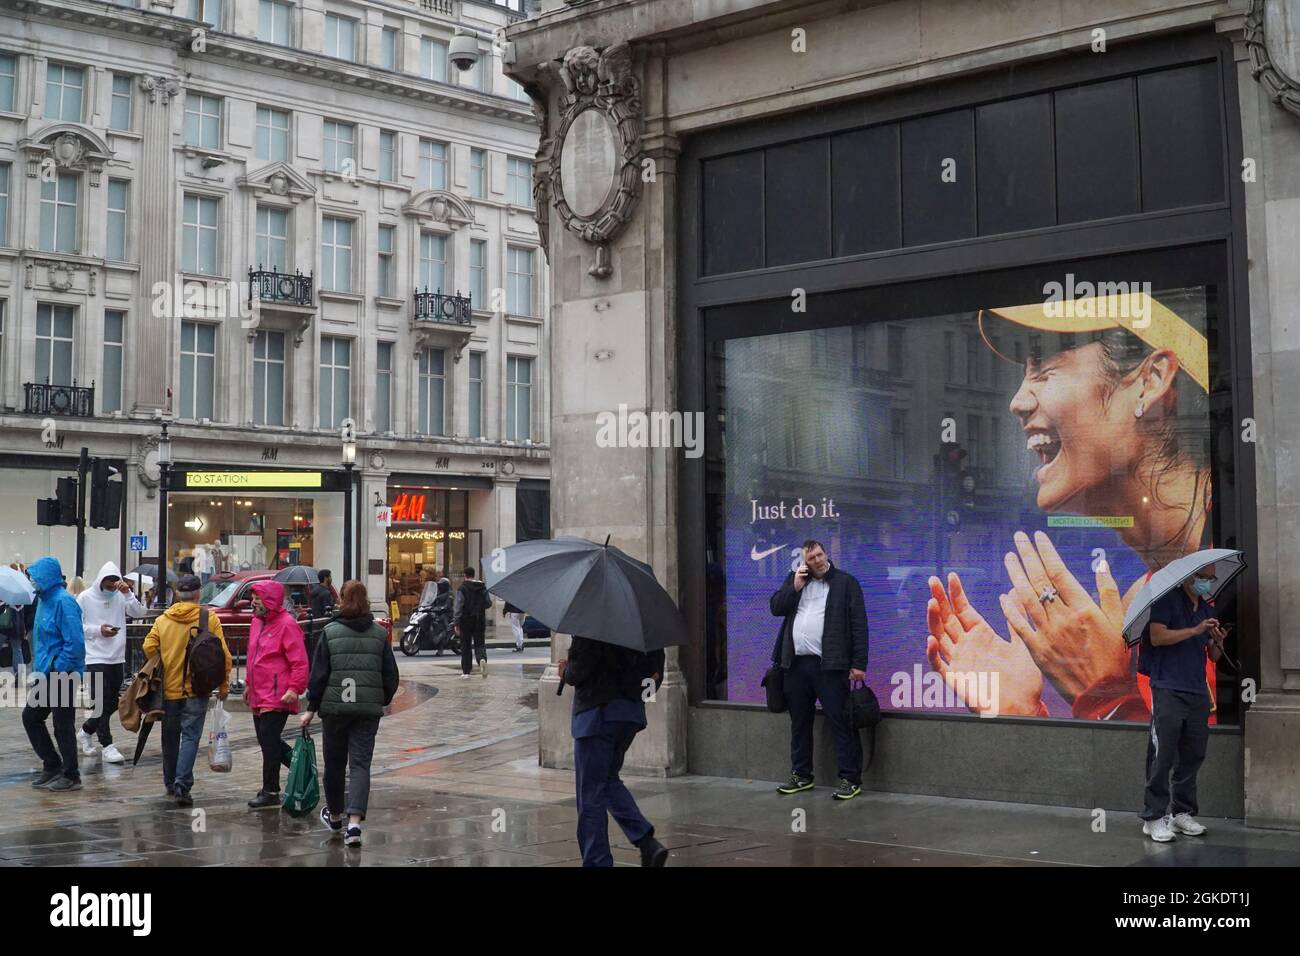 London, UK, 14 September 2021: At Nike Town at Oxford Circus in the heart of the West End giant screens show images of tennis prodigy Emma Raducanu, taken a moment after she won the US Open tennis tournament. Emma Raducanu is sponsored by Nike and expected to be able to build a lucrative career with sponsorships and commercial endorsements due to her extraordinary sporting ability combined with good looks, youth and multi-cultural appeal based on her joint Romanian and Chinese heritage. Anna Watson/Alamy Live News Stock Photo